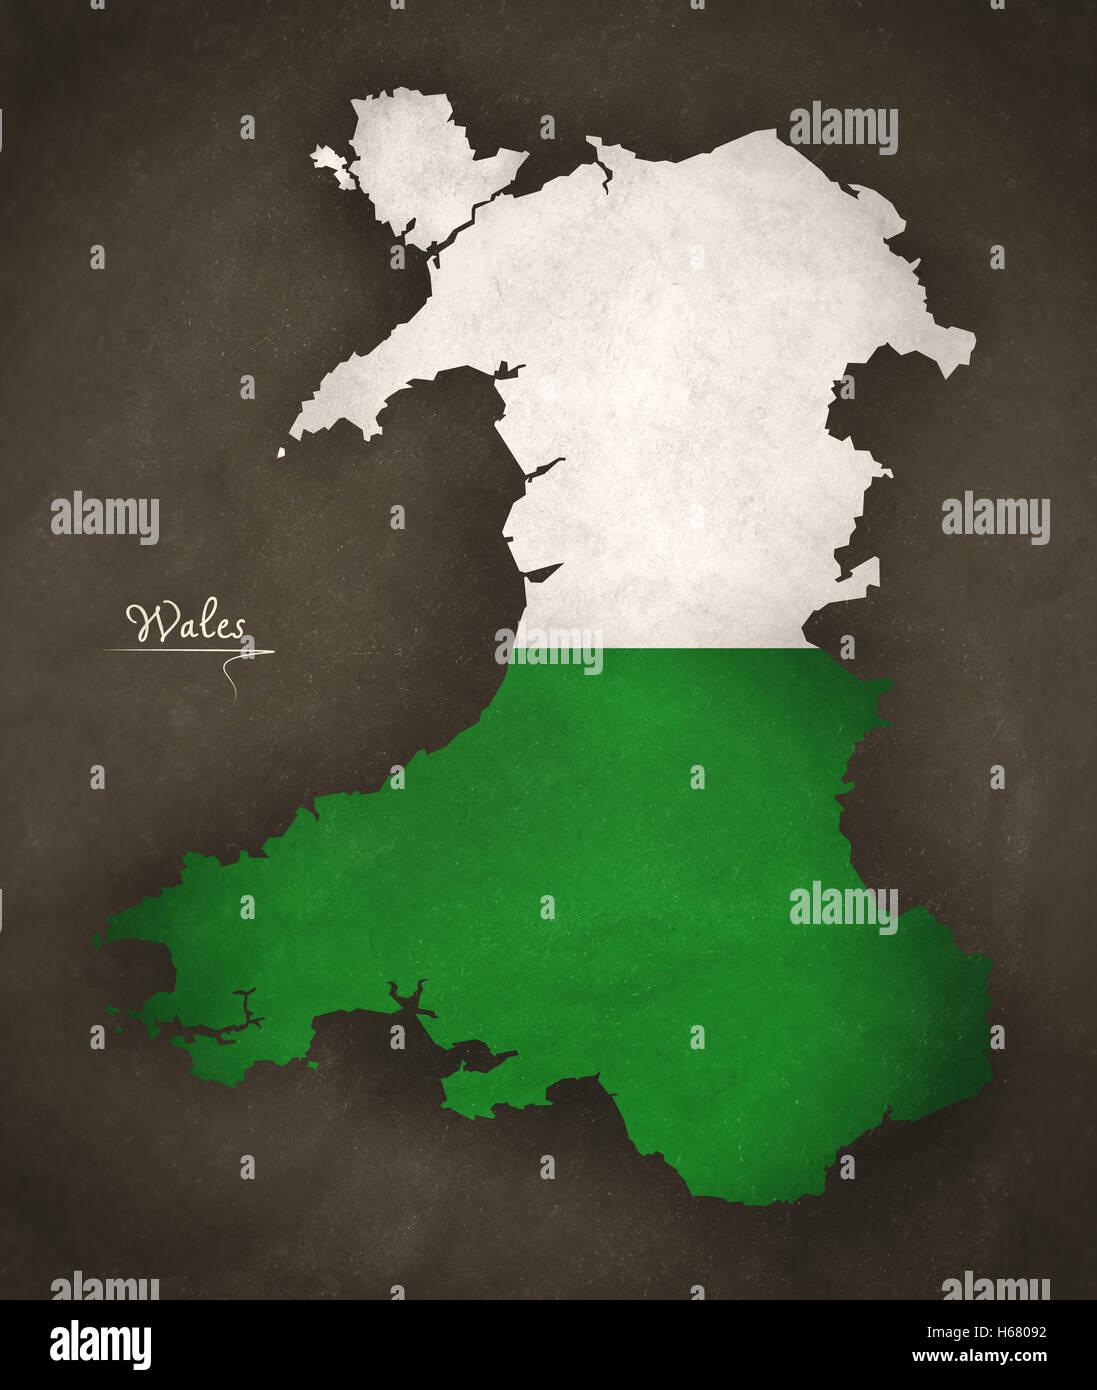 Wales map special vintage artwork style with flag illustration Stock Photo